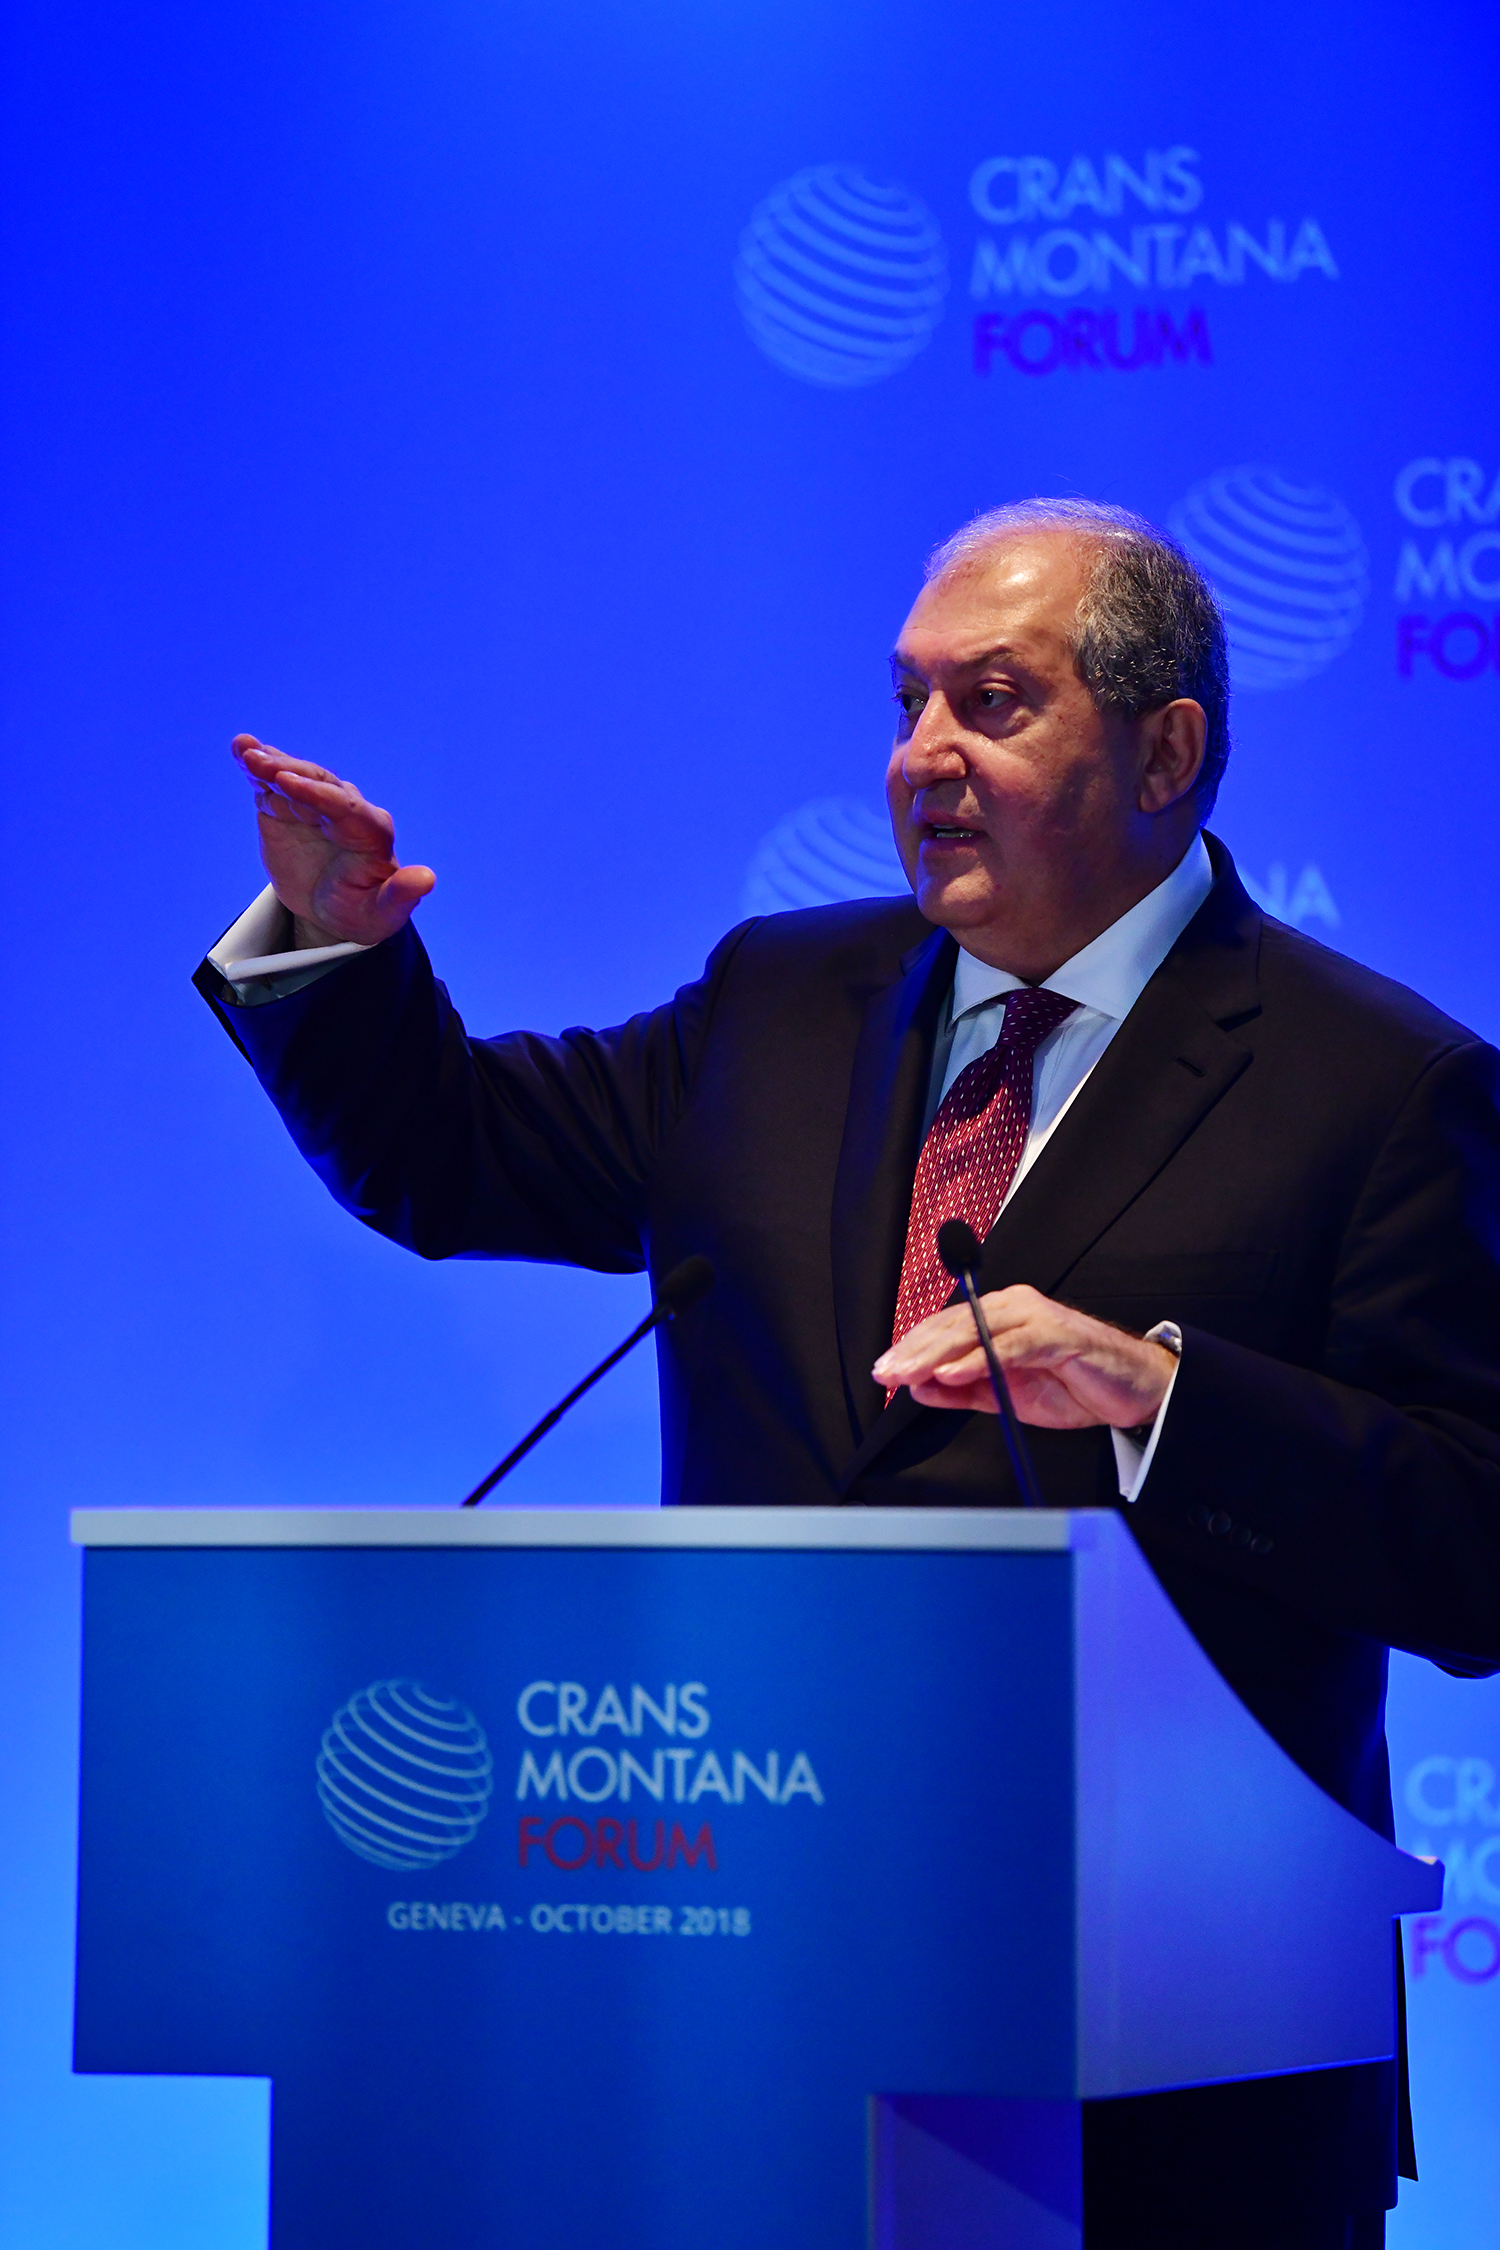 Armen Sarkissian: Armenia is the example of a country which lives in the 21st century